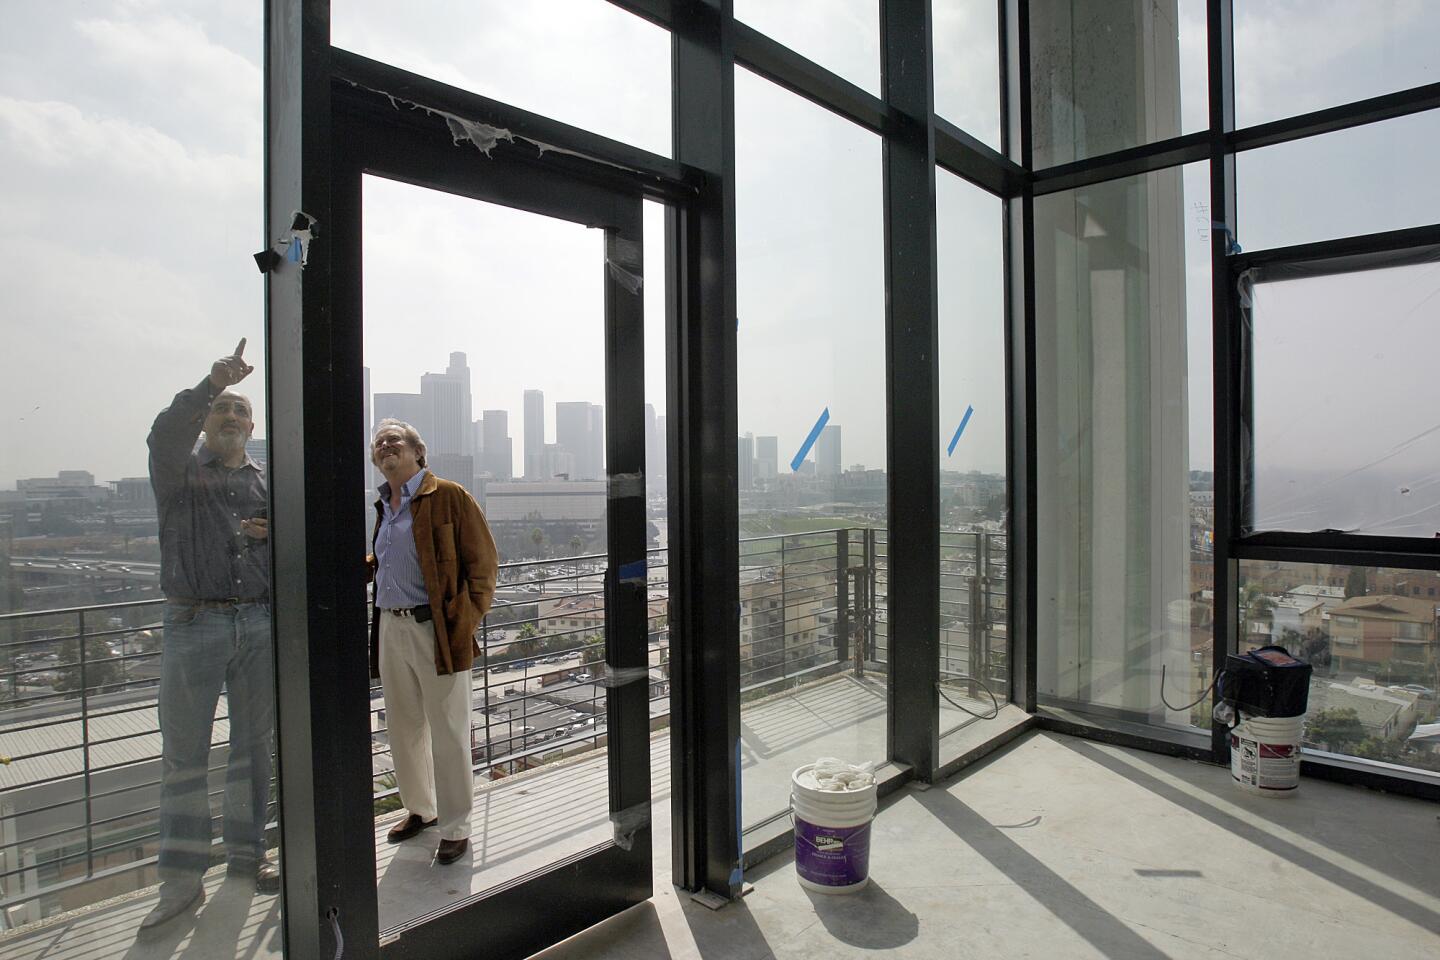 Linear City Development's Leonard Hill, right, and Yuval Bar-Zemer view one of the Elysian's penthouse apartments. The 14 high-ceiling penthouses will rent for up to $6,500 a month.